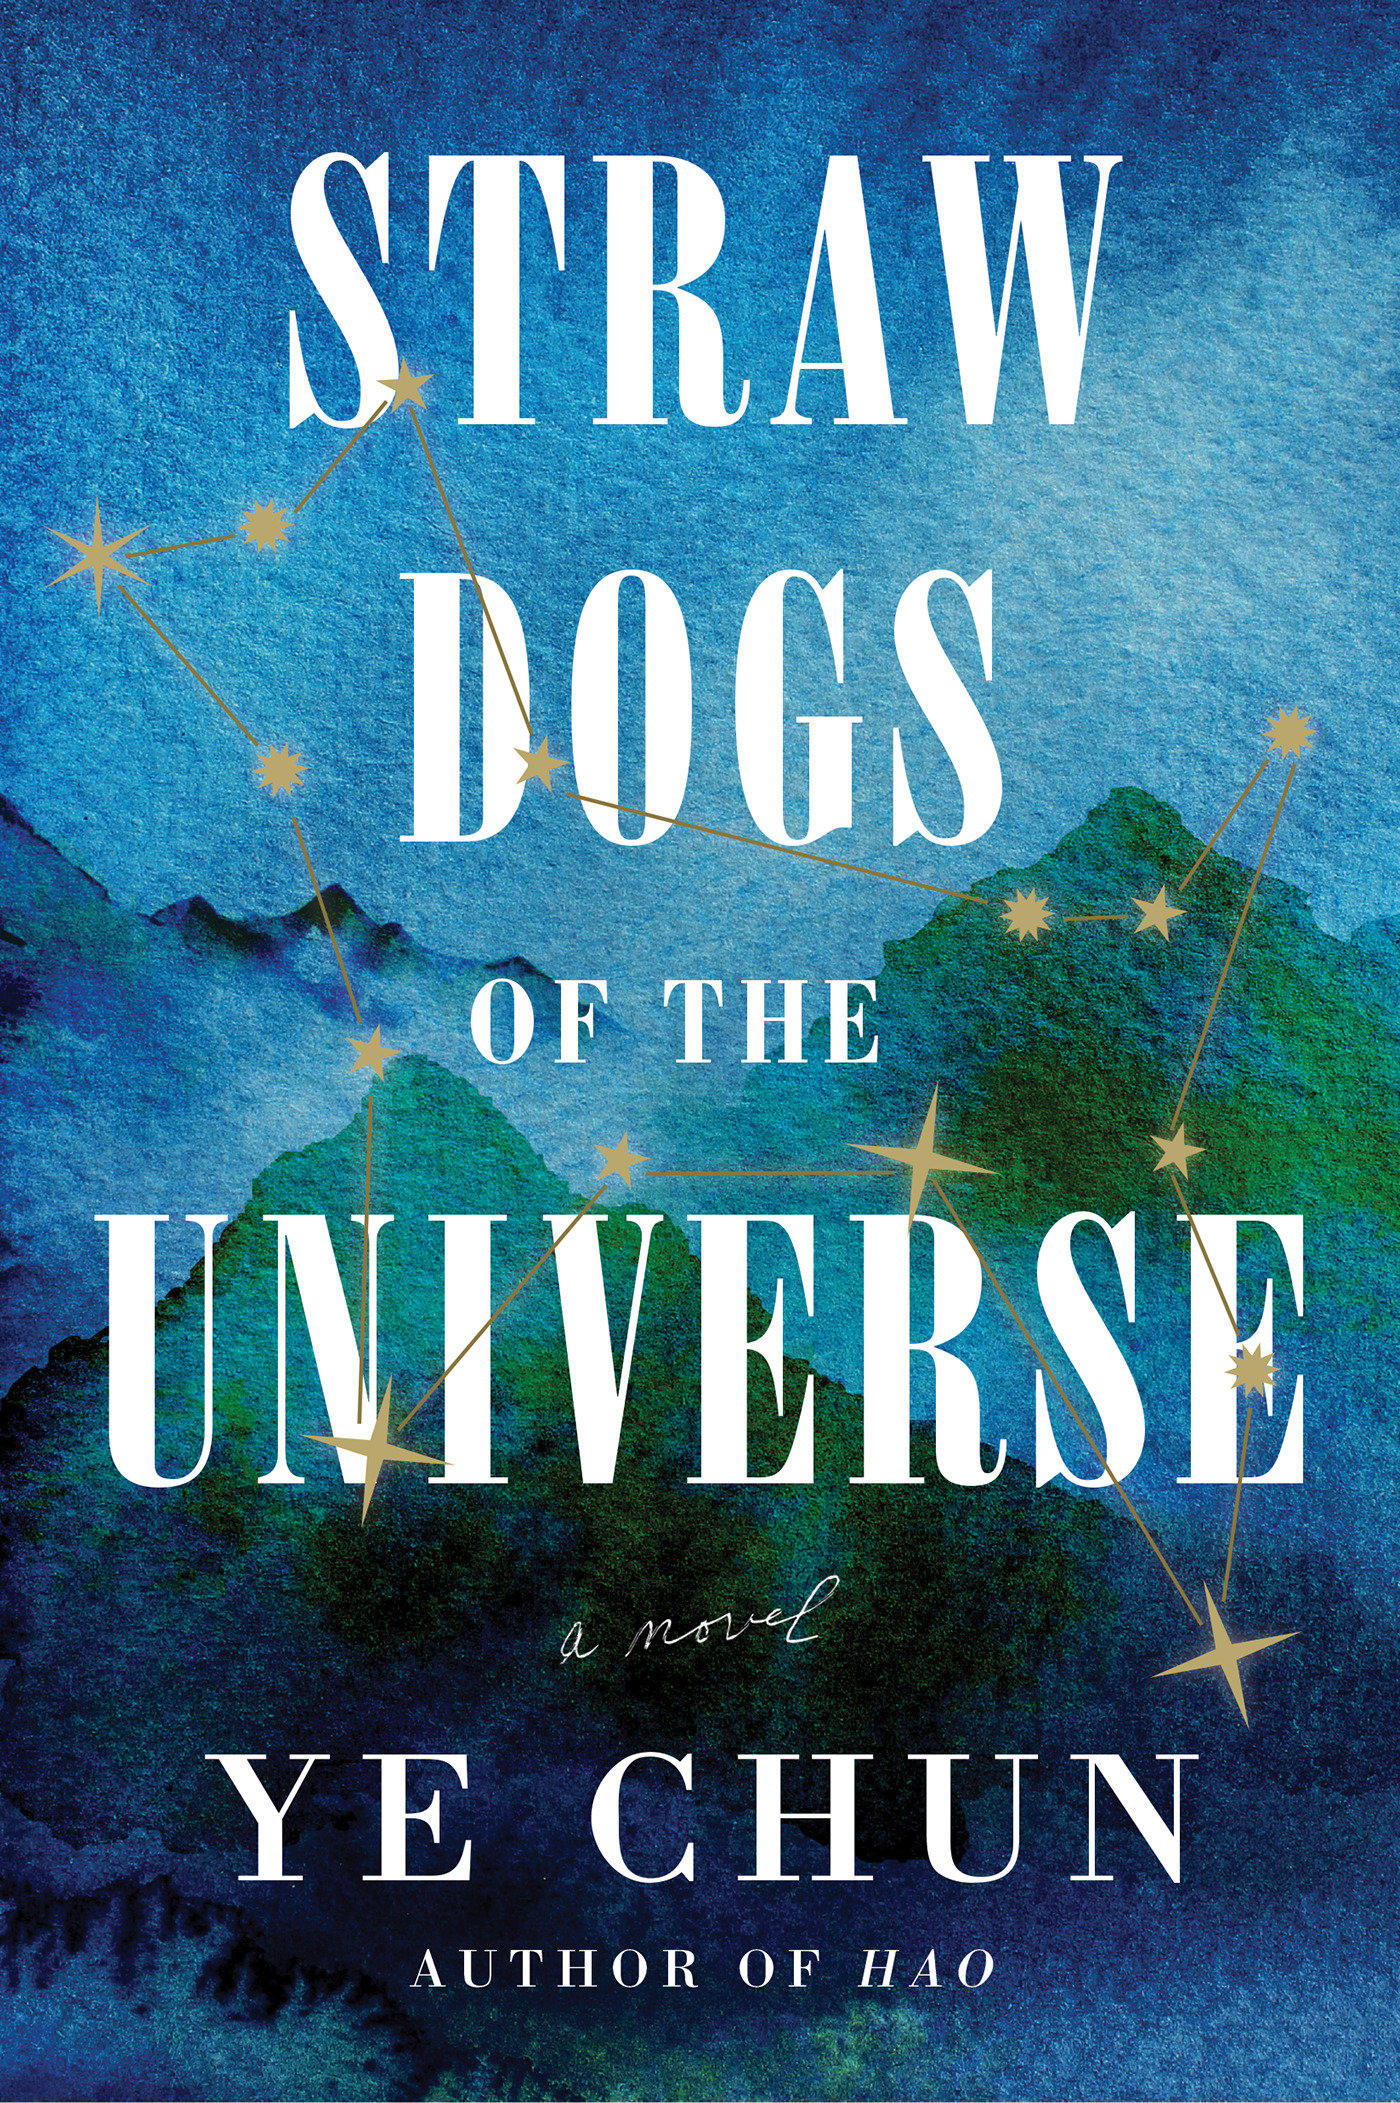 Straw Dogs Of The Universe (Hardcover Book)